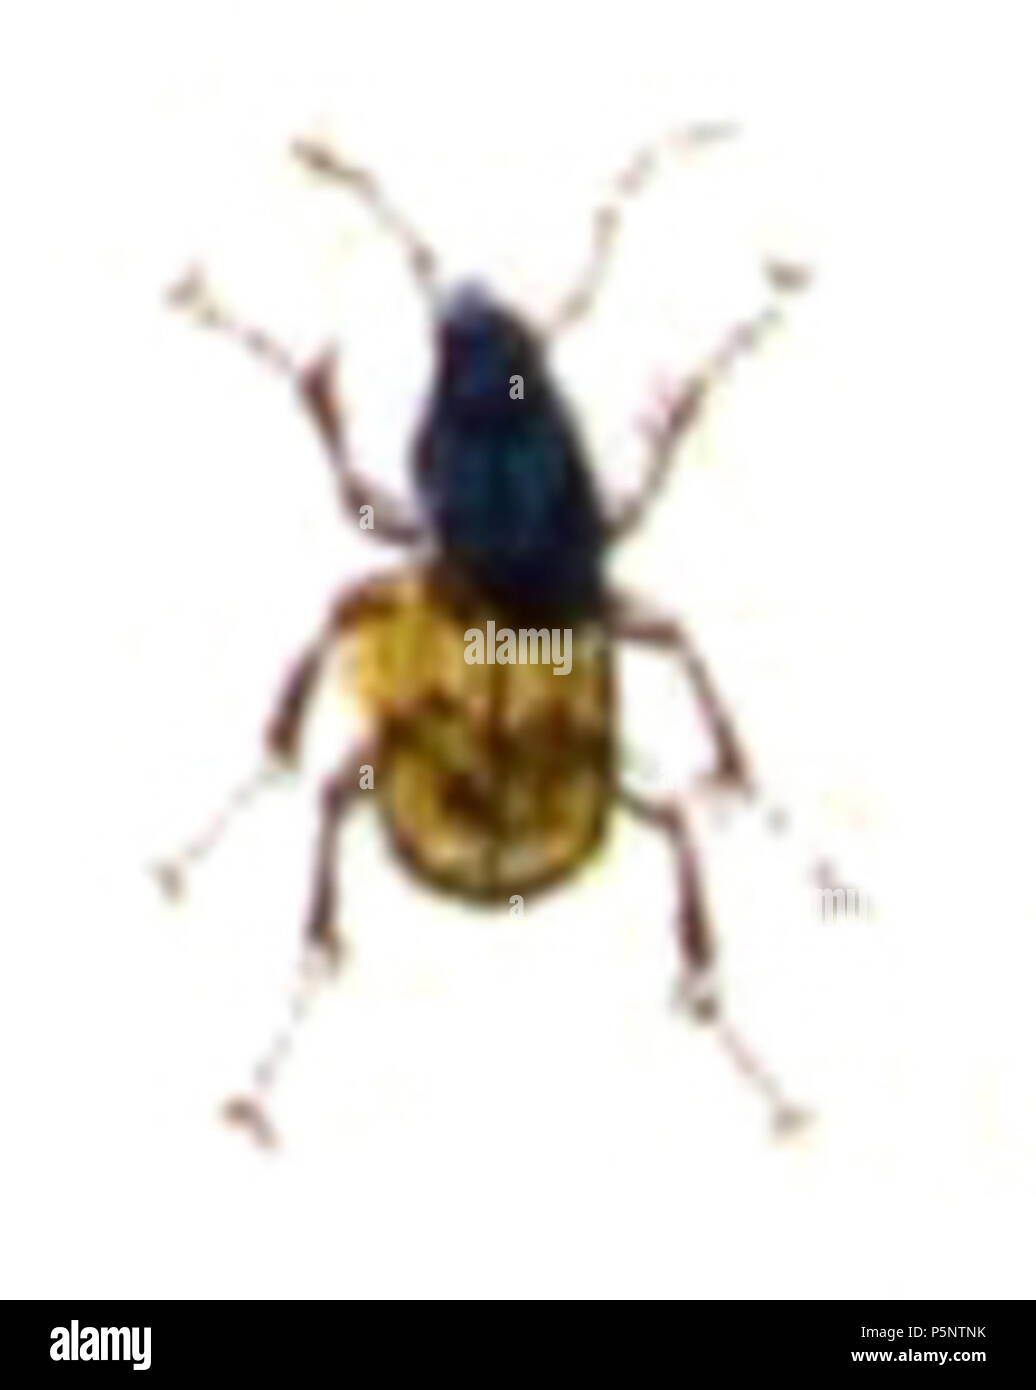 N/A. Odontium litorale = Bembidion litorale, from Calwer's Käferbuch, Table 6, Picture 31. Taxonomy was updated to 2008, using mostly the sites Fauna Europaea and BioLib. Please contact Sarefo if the determination is wrong! . 1876. Book by   Carl Gustav Calwer  (1821–1874)    Description German ornithologist and entomologist  Date of birth/death 11 November 1821 19 August 1874  Location of birth/death Stuttgart Mineralbad Berg  Authority control  : Q78413 VIAF:64757747 ISNI:0000 0001 0980 5321 GND:116432969 SUDOC:146603133 Koninklijke:07228000X      Gustav Jäger  (1832–1917)     Alternative na Stock Photo